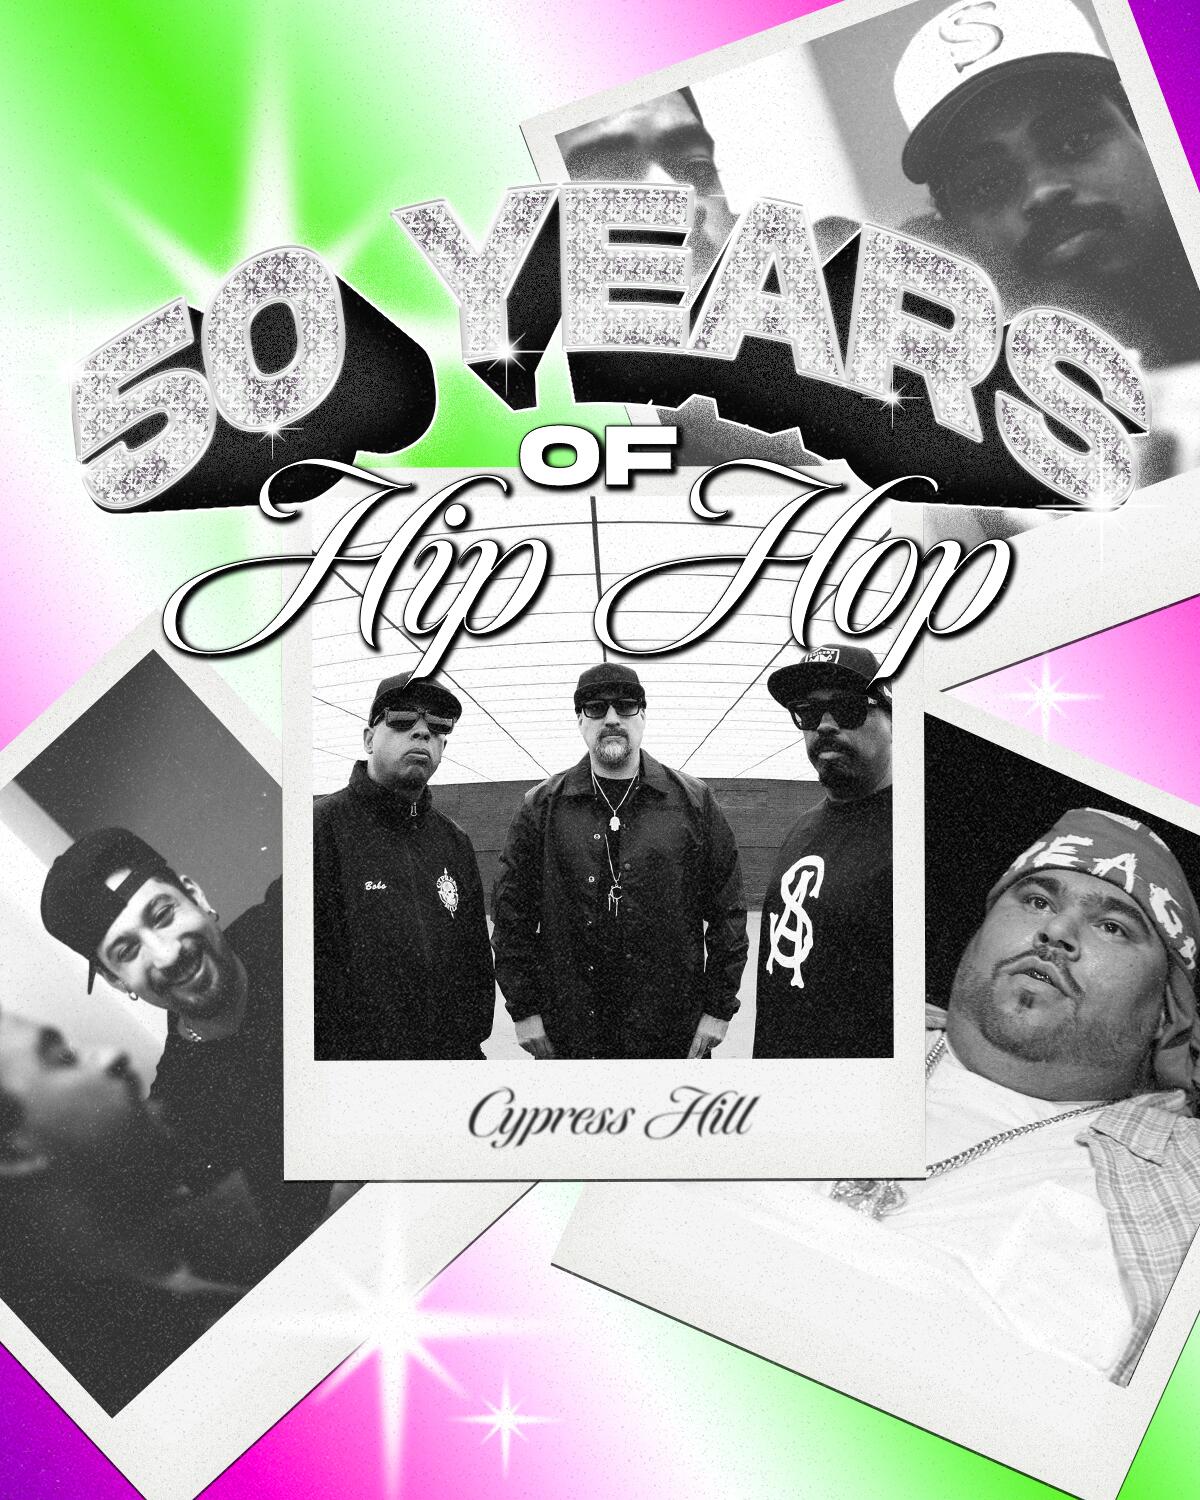 A photo montage celebrating 50 years of hip-hop